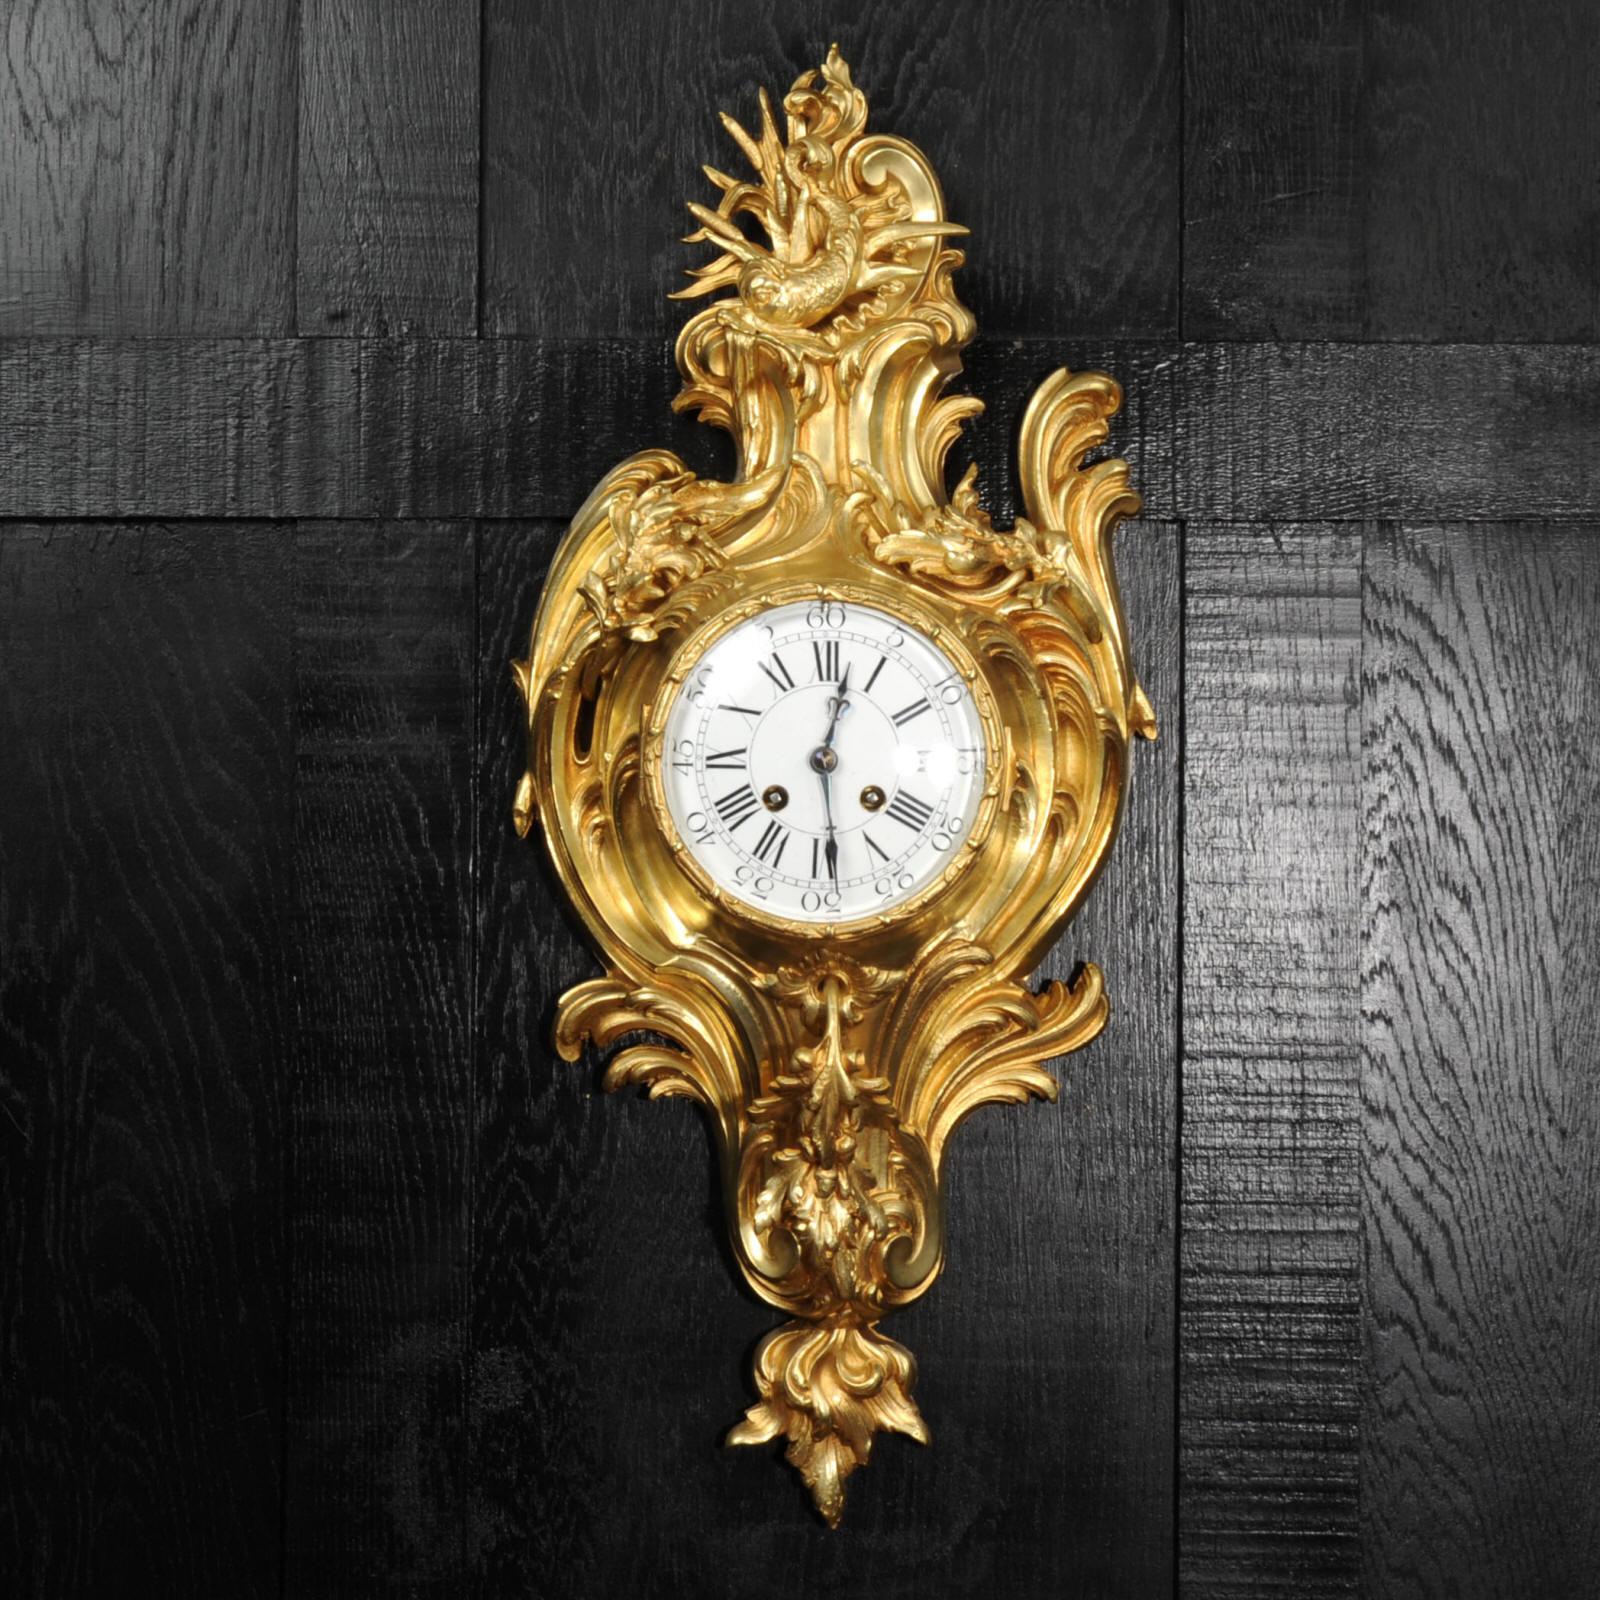 A beautiful original antique French cartel wall clock, circa 1880. It is finely made in ormolu (finely gilded bronze doré), in the Rococo style, and features a dolphin to the top, riding a C scroll of surf. The case is formed of flowing splashes of